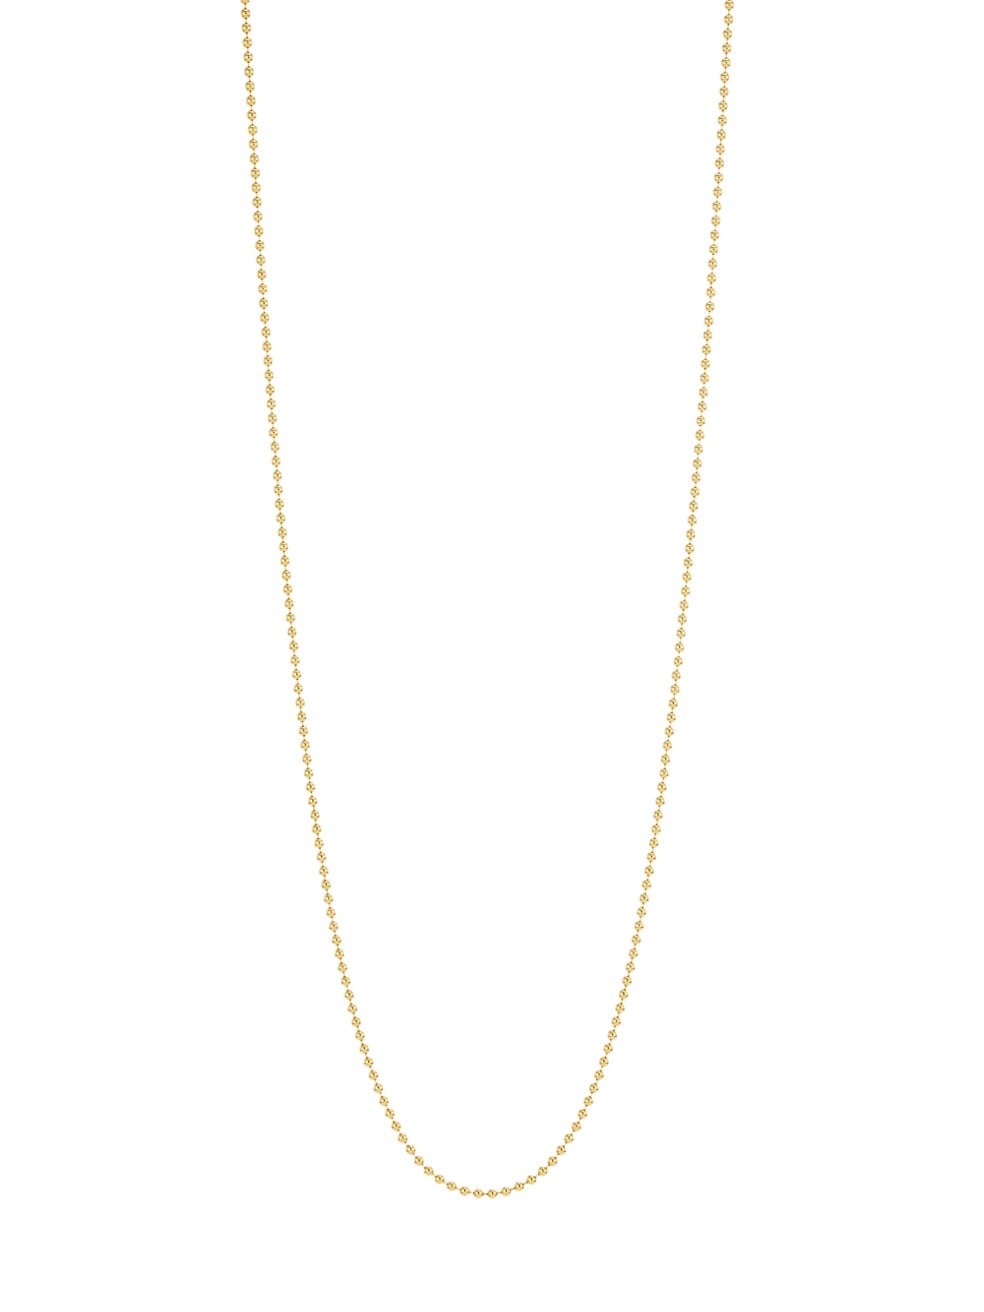 Roberto Coin 18KY Beaded Chain Necklace